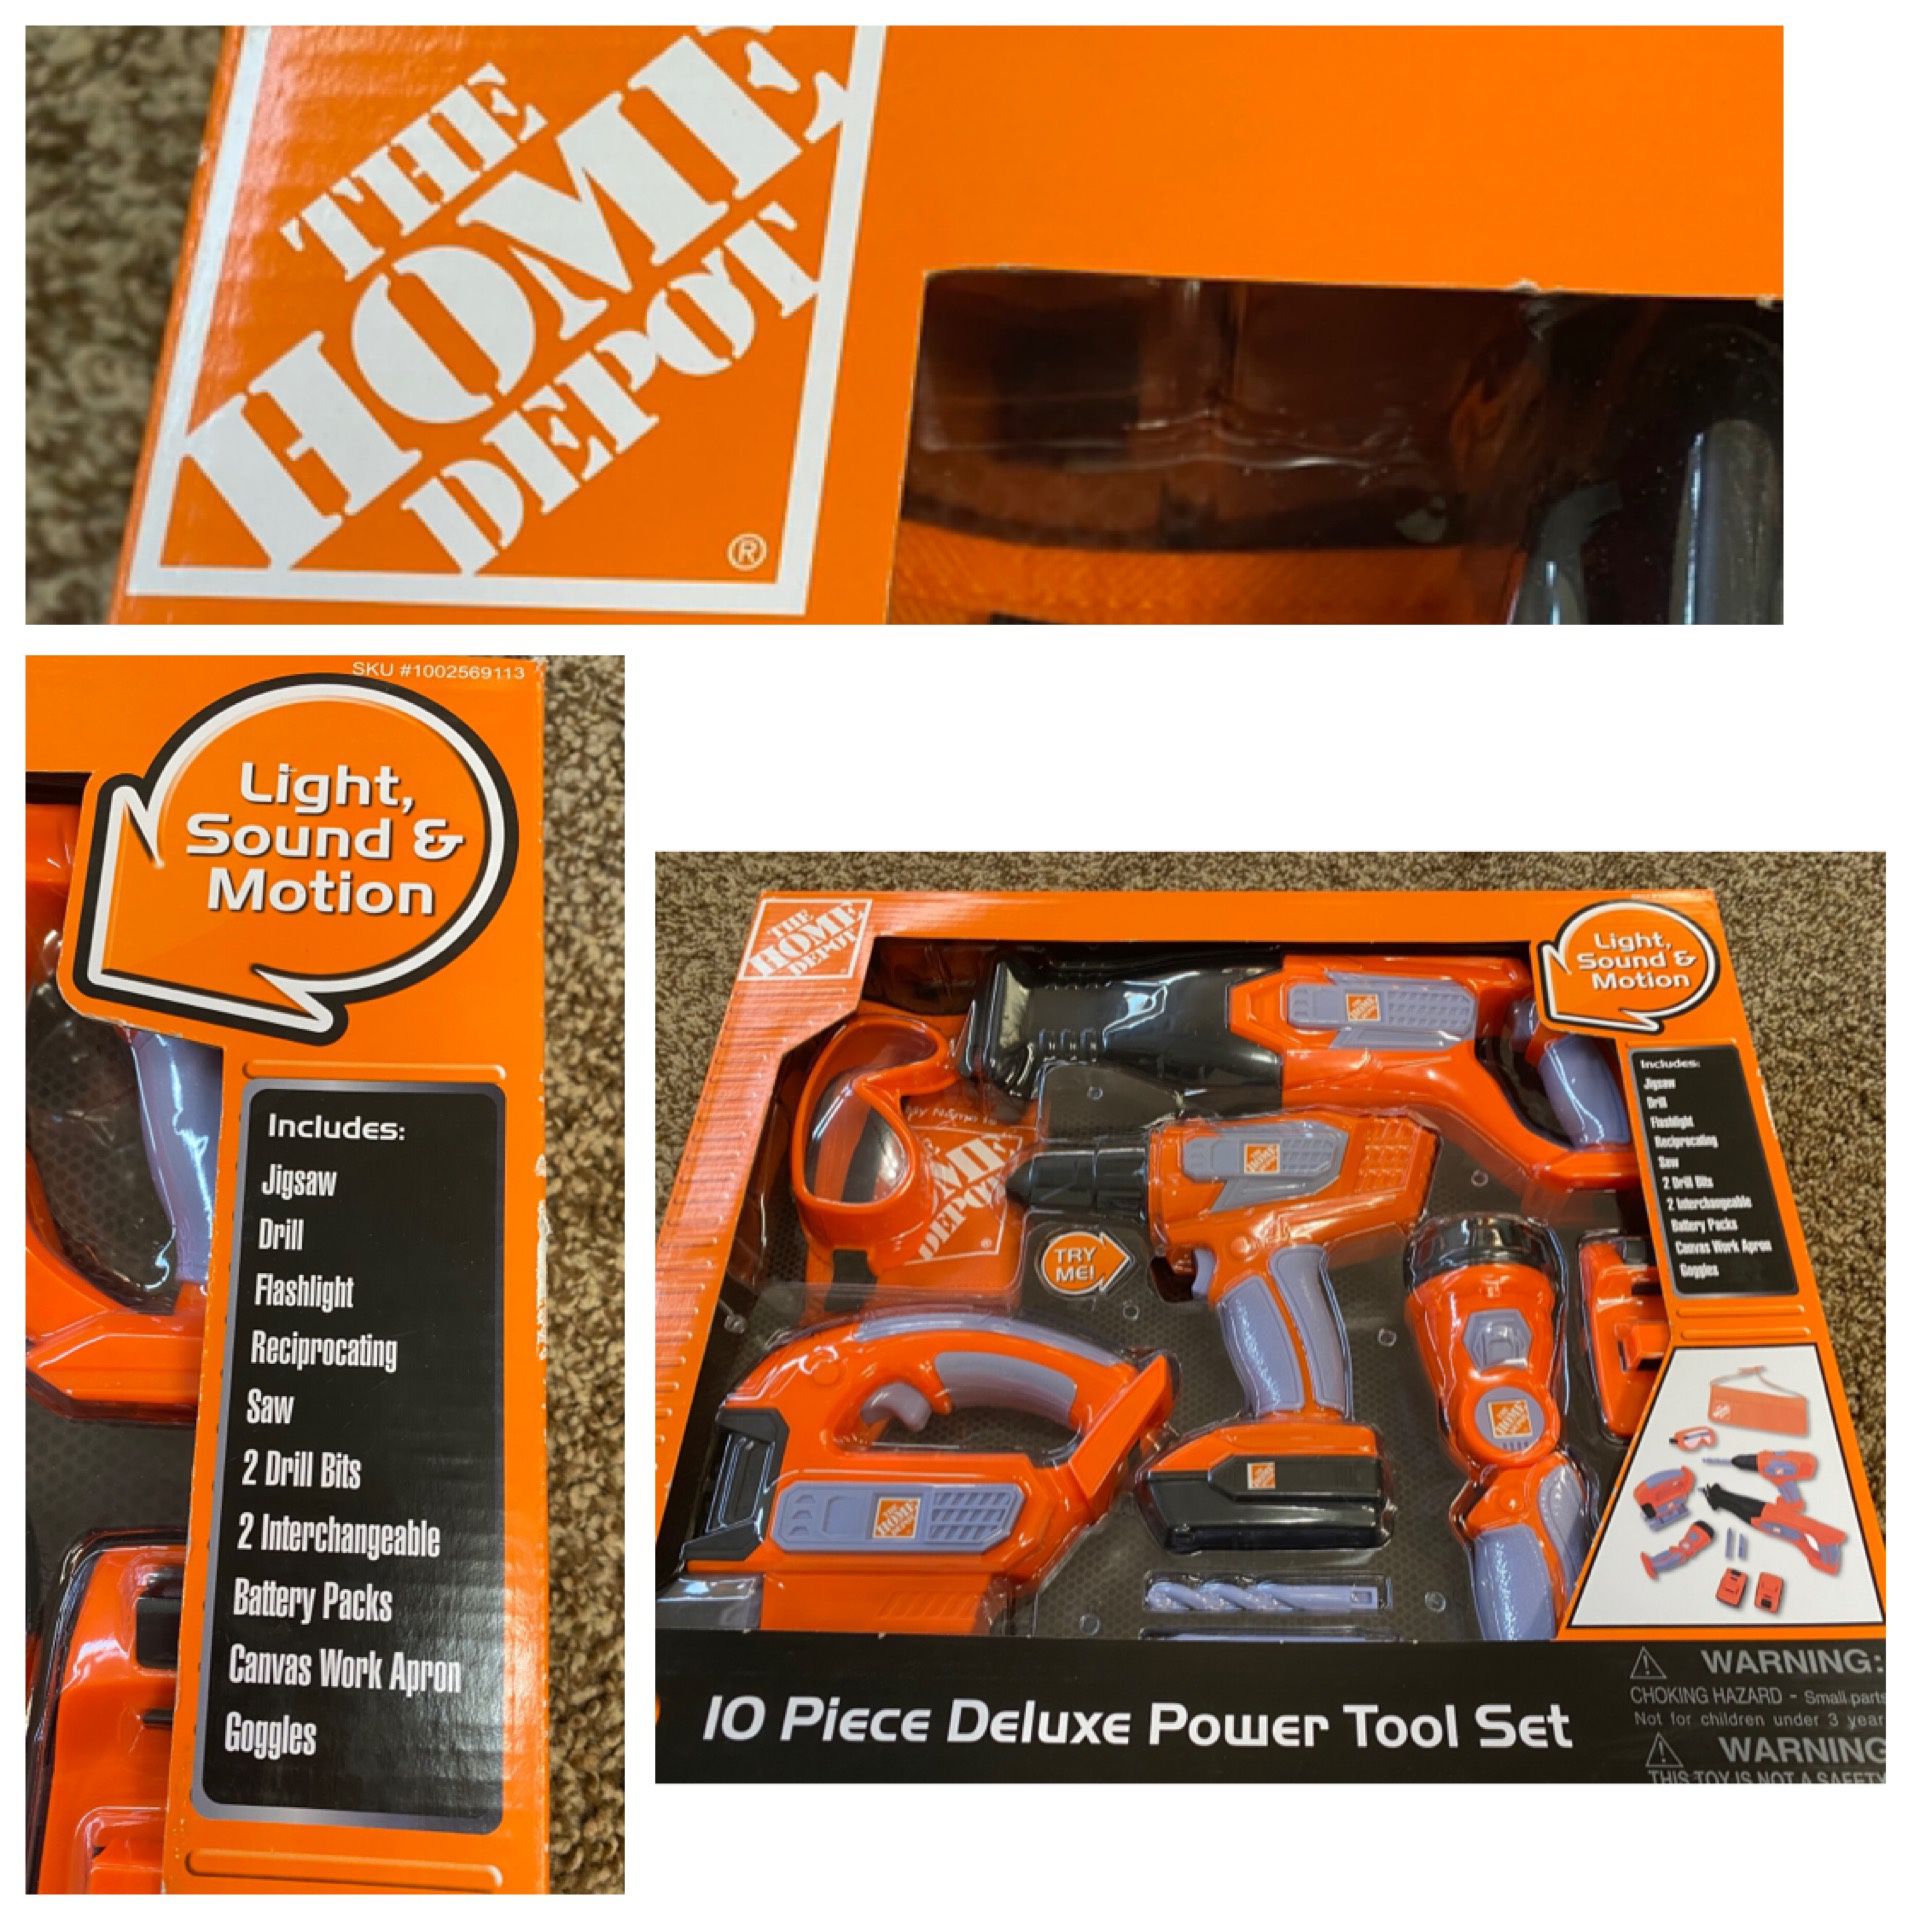 Kids HOME DEPOT 10 pc deluxe kids power tool set. Brand new great gift. 35.00